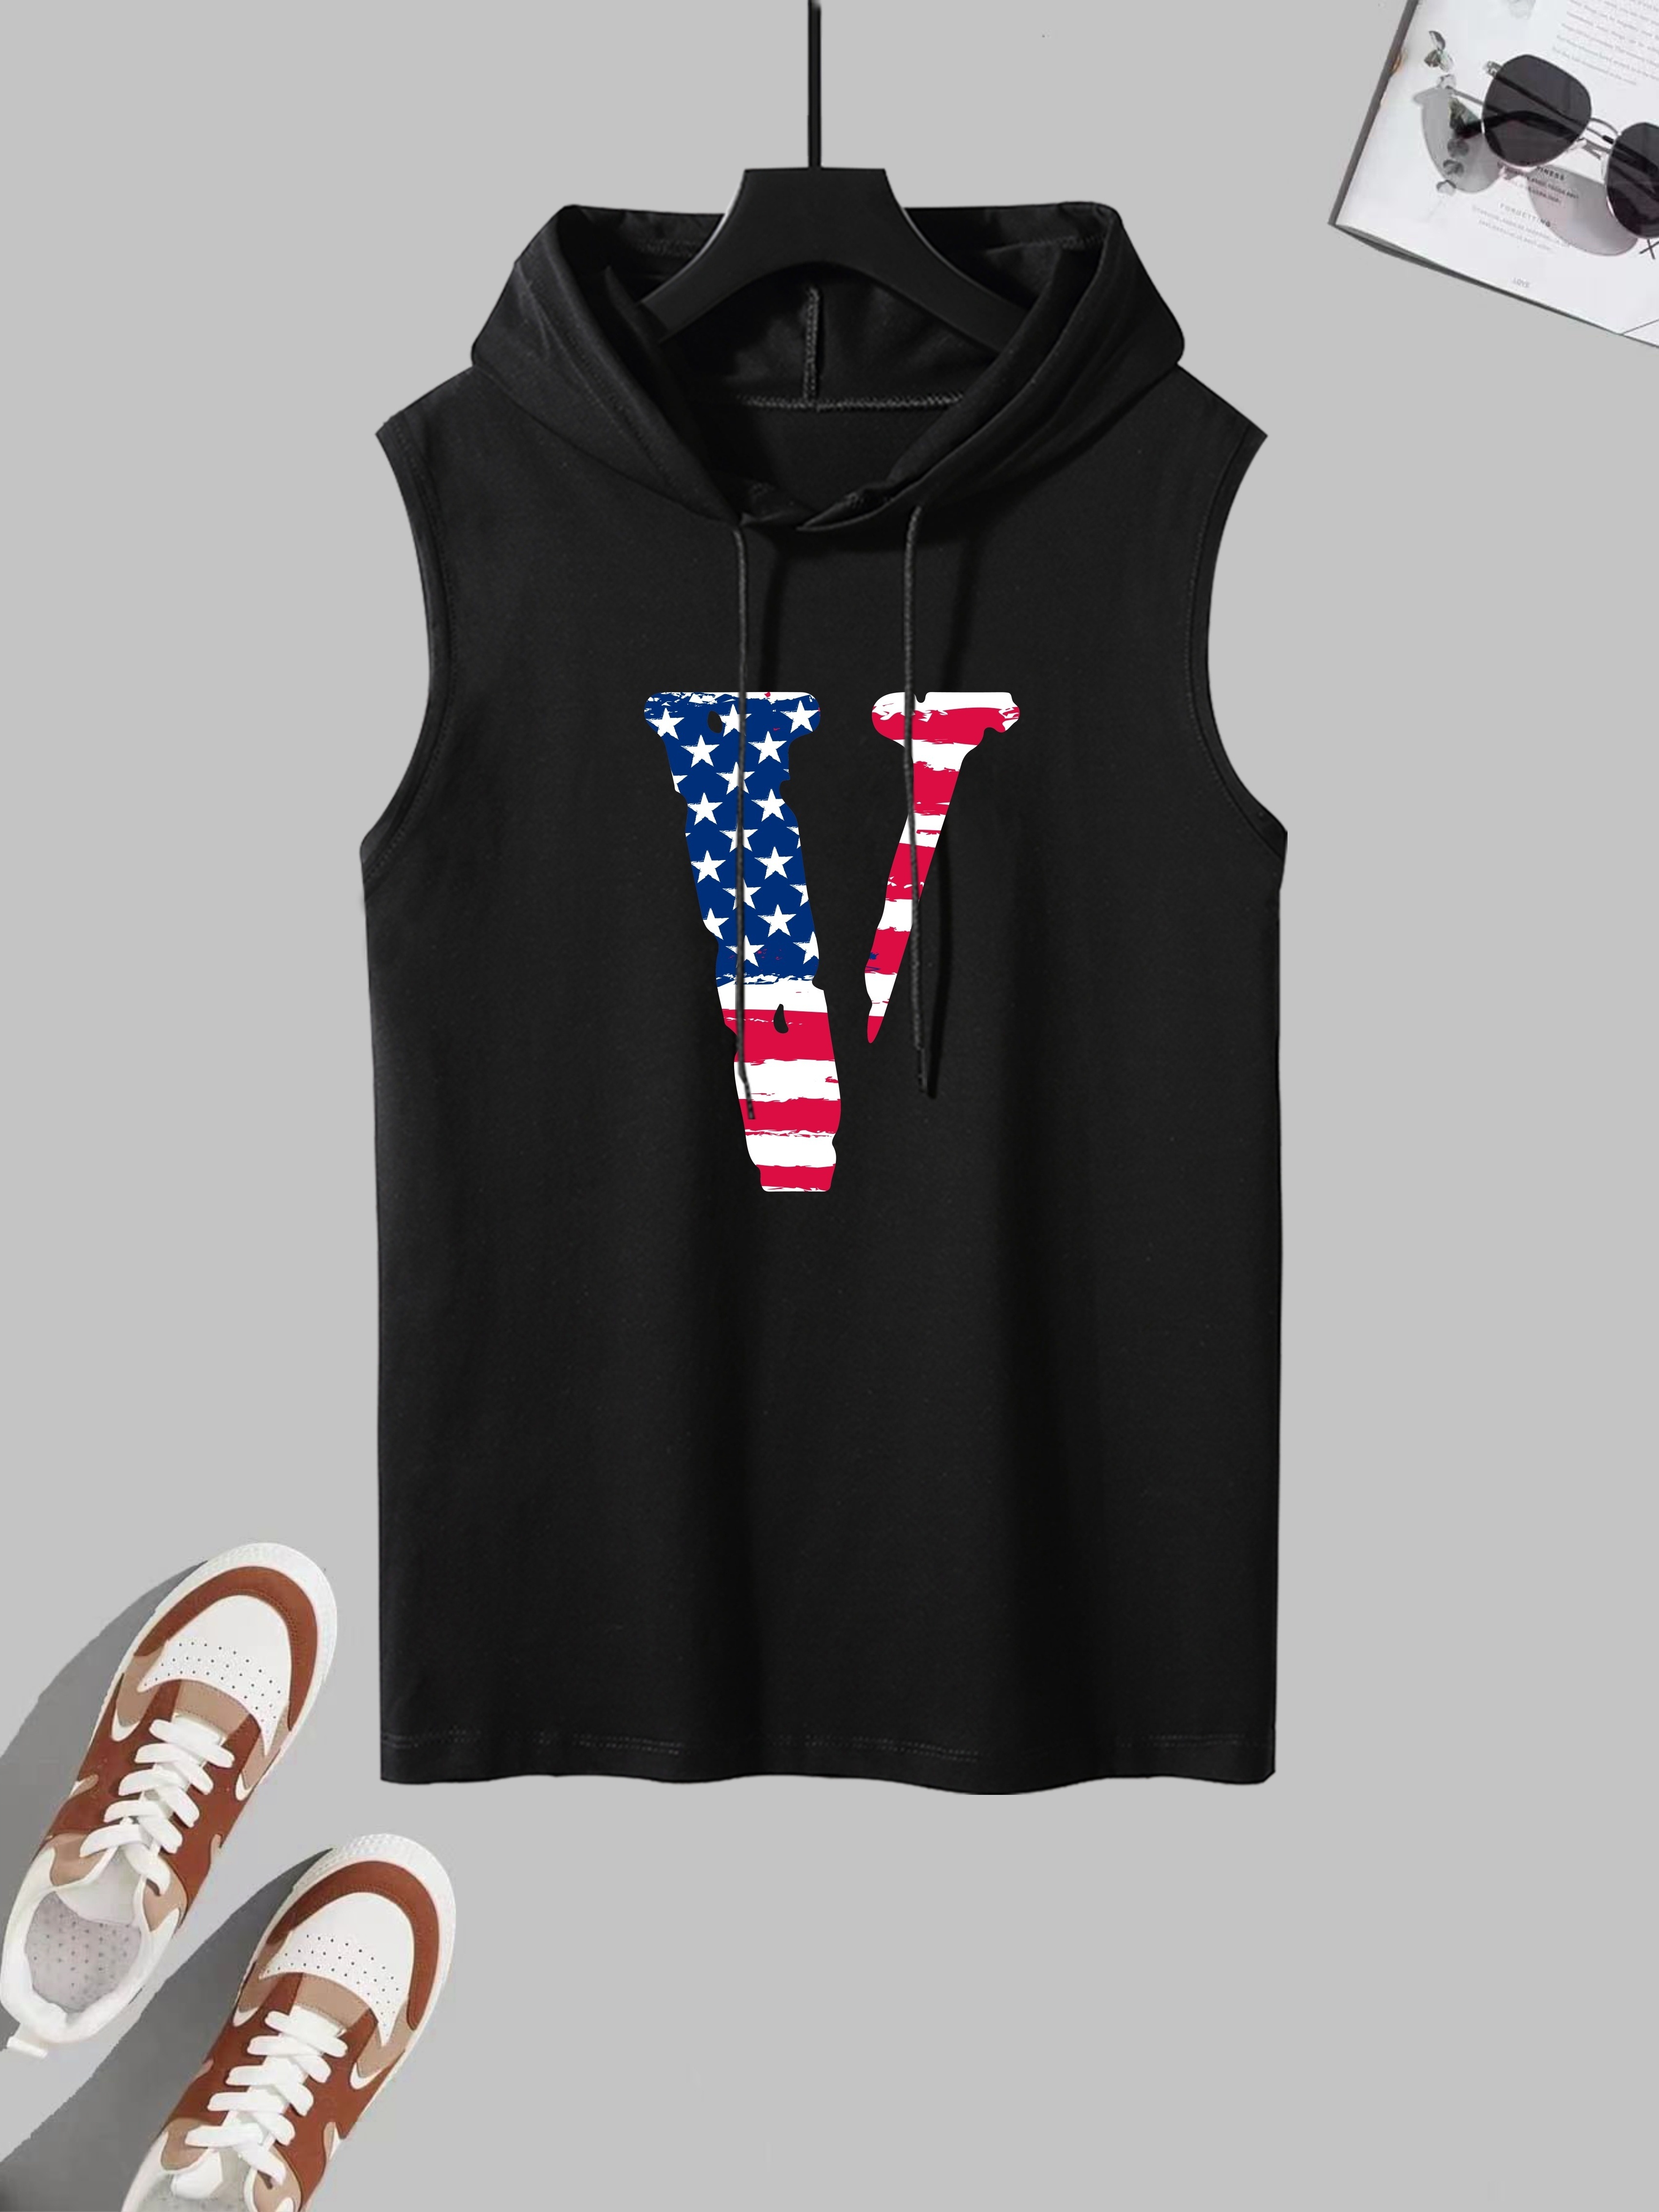 Men's Workout Hooded Tank Tops Sleeveless Gym Hoodies Bodybuilding  Muscle Shirts